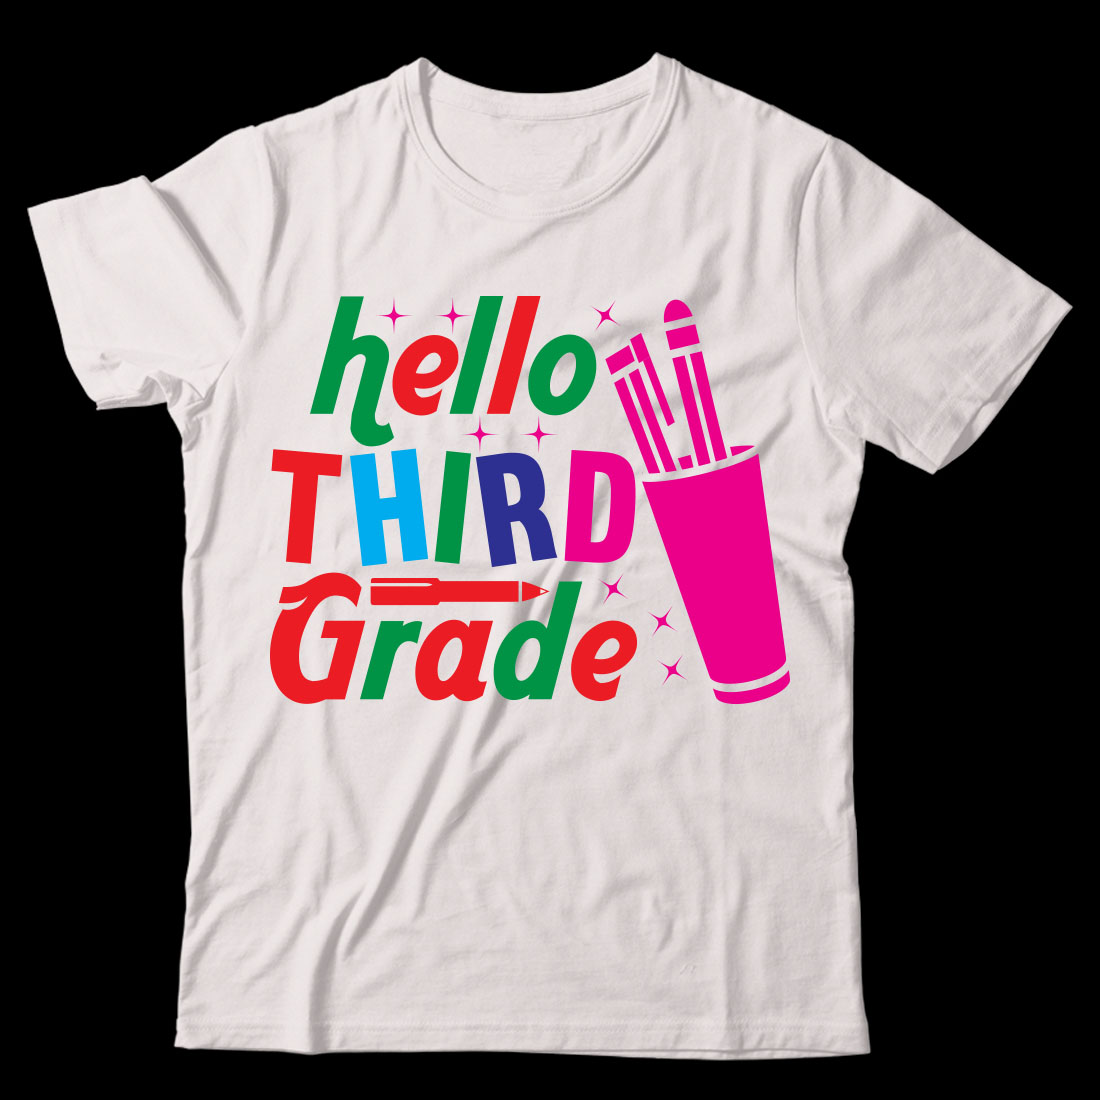 White t - shirt with the words hello third grade on it.